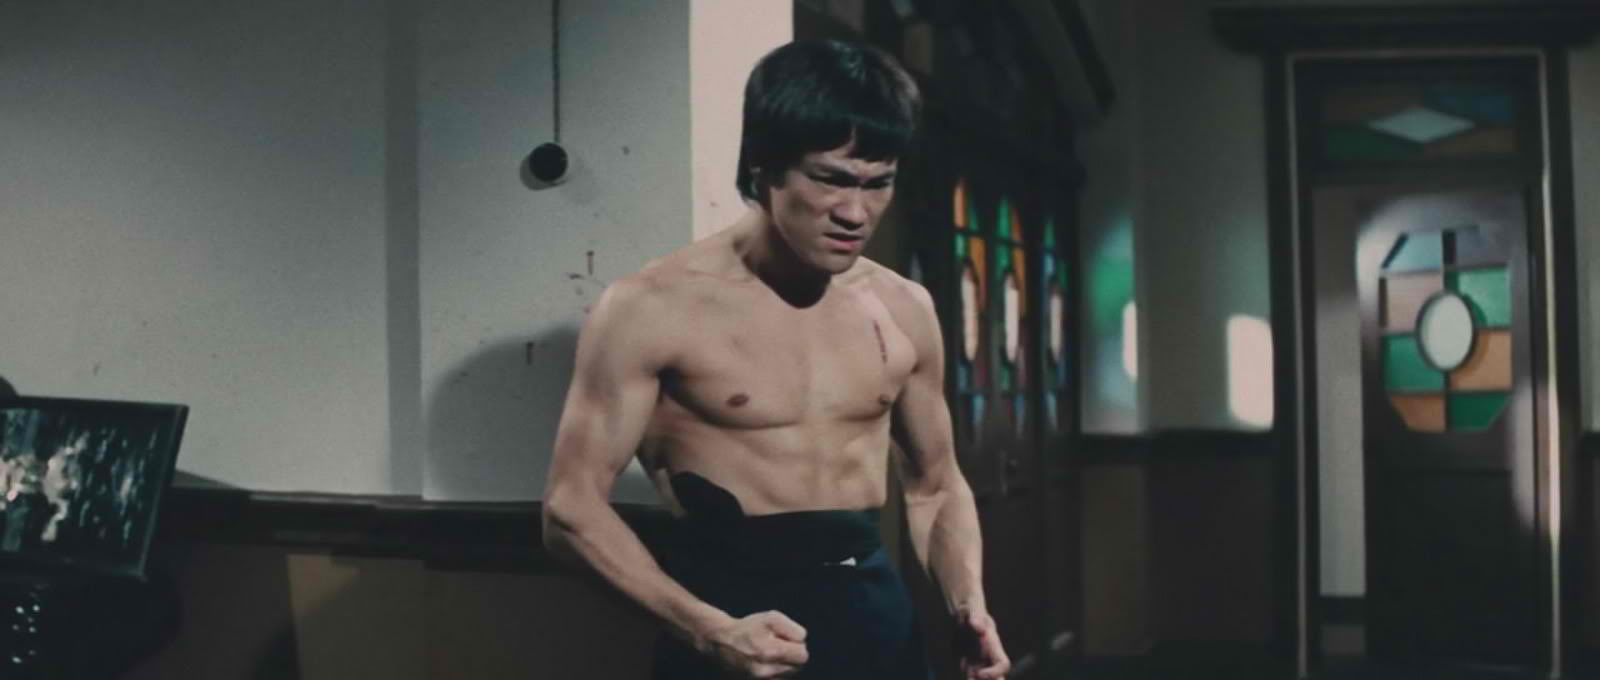 bruce lee imagens Fist of Fury HD wallpaper and background